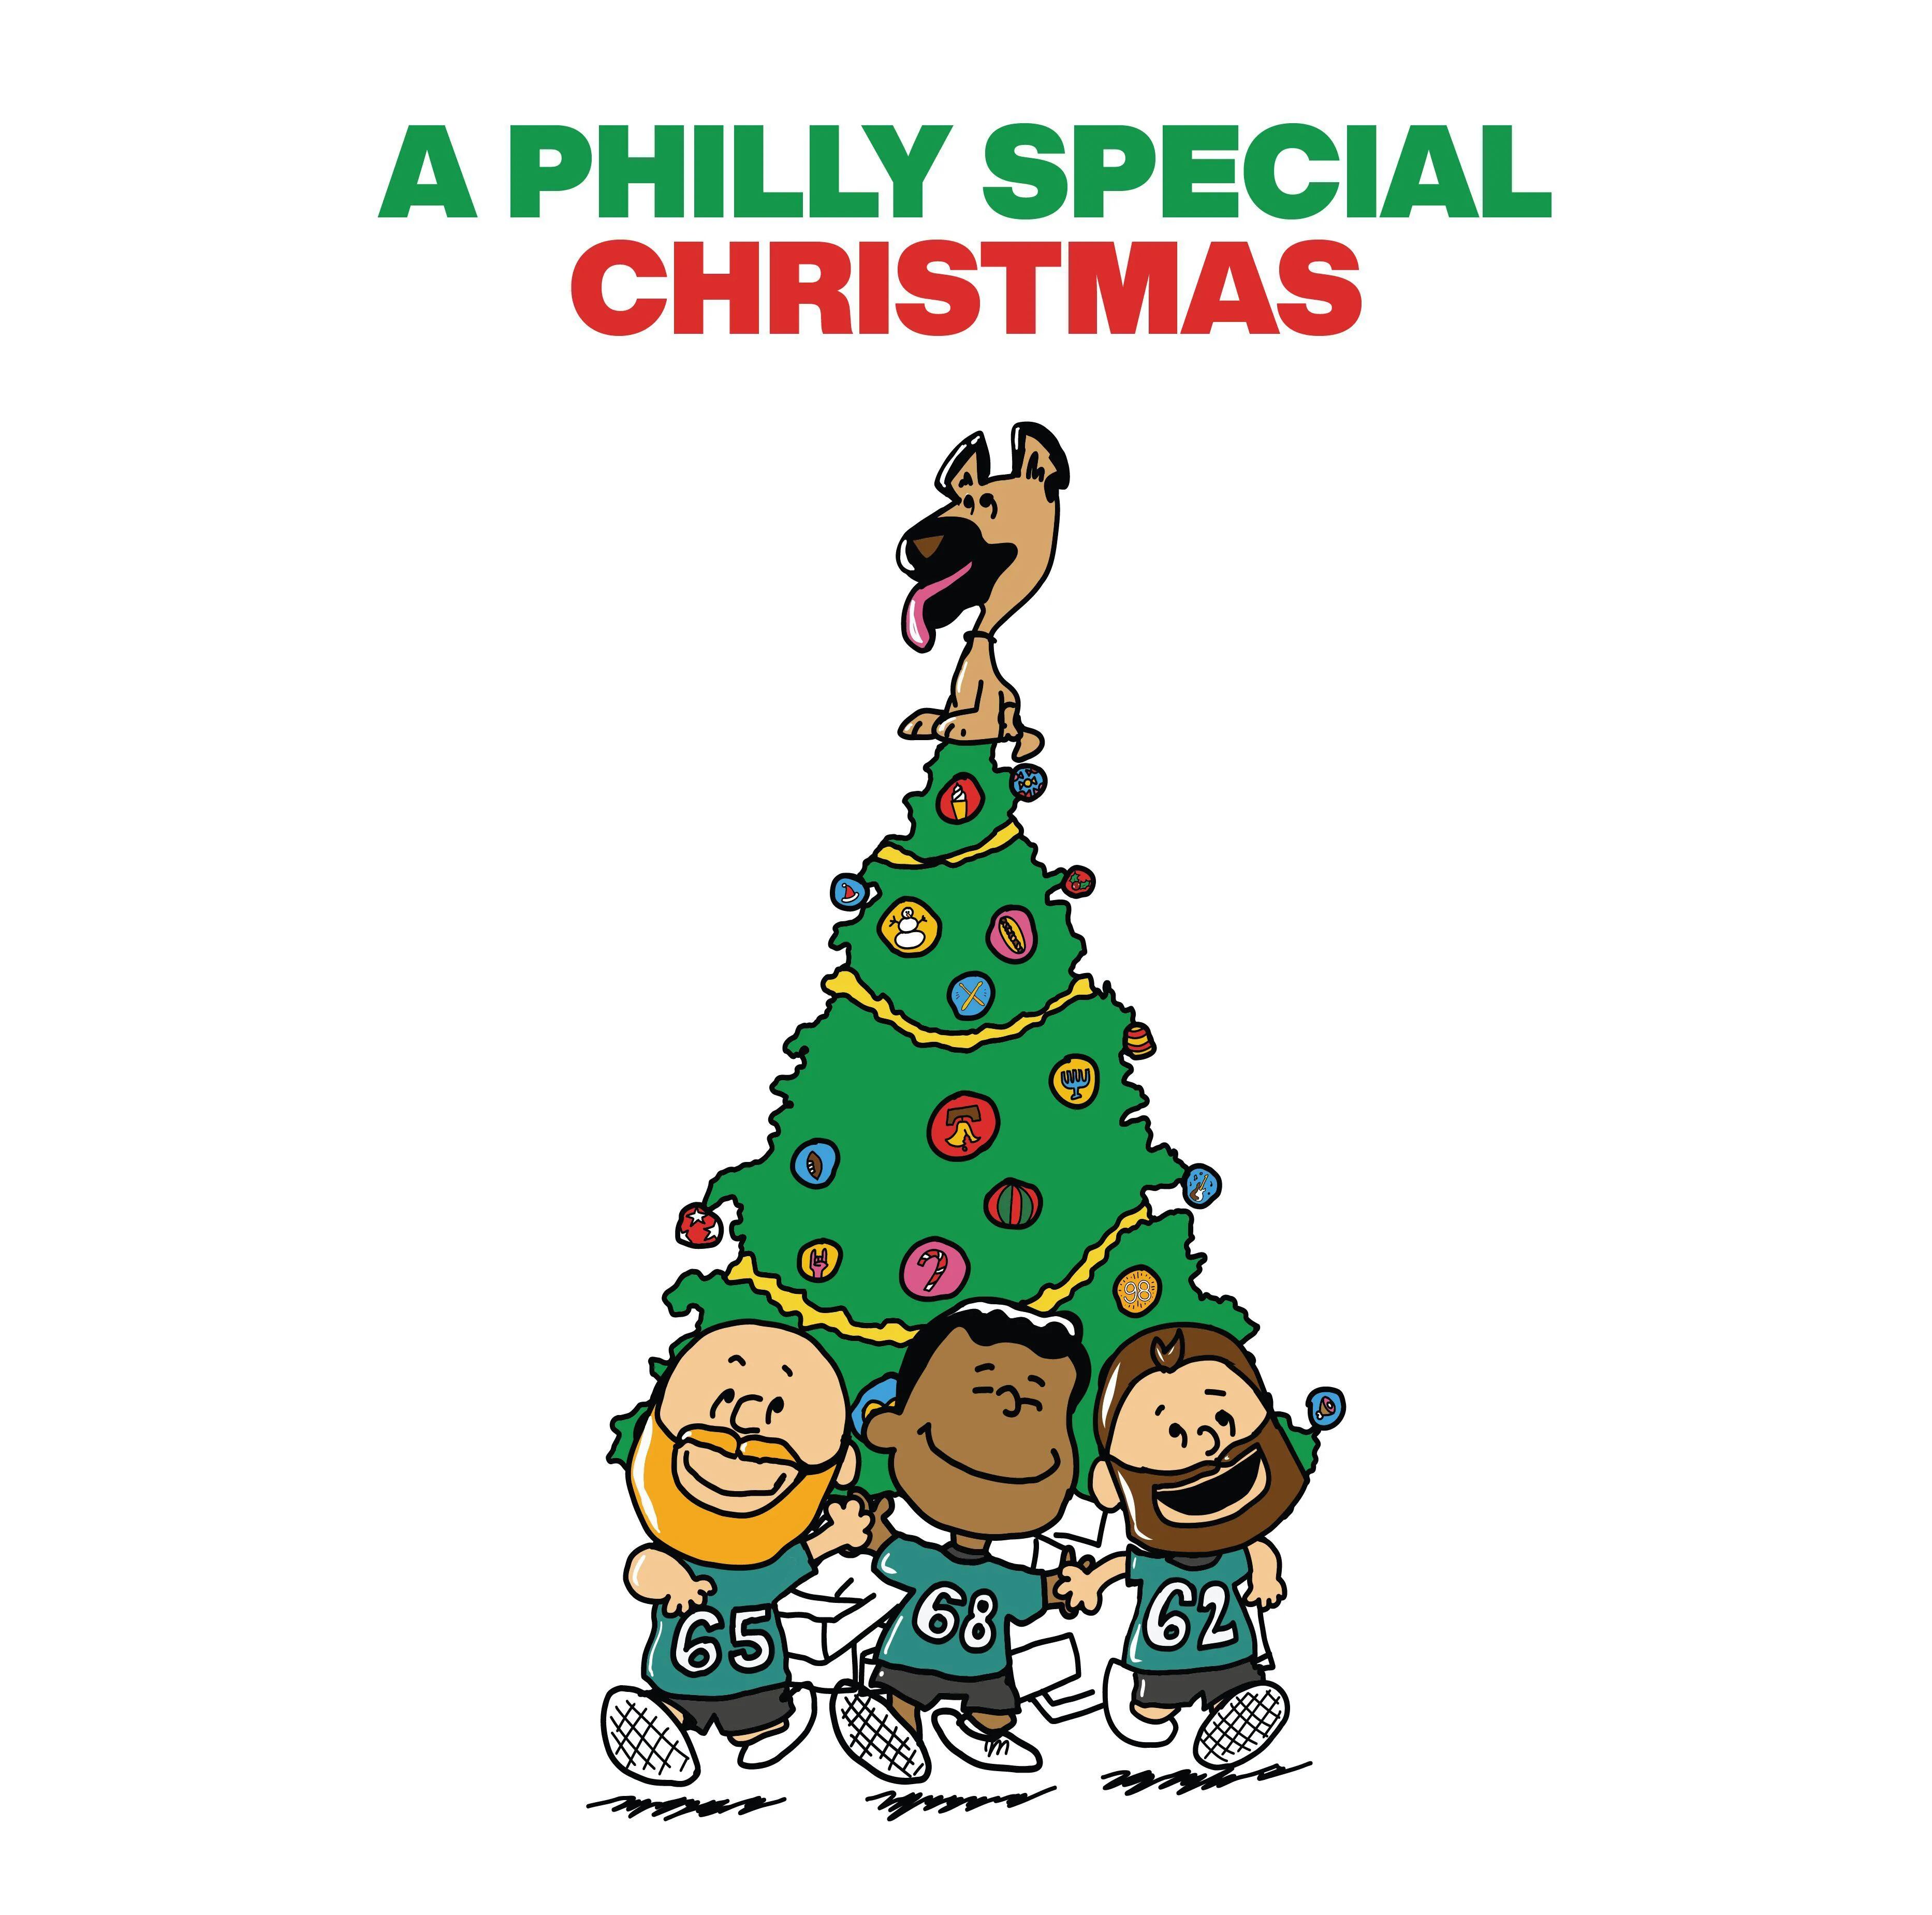 Eagles 'A Philly Special Christmas' album will go on sale one more time 